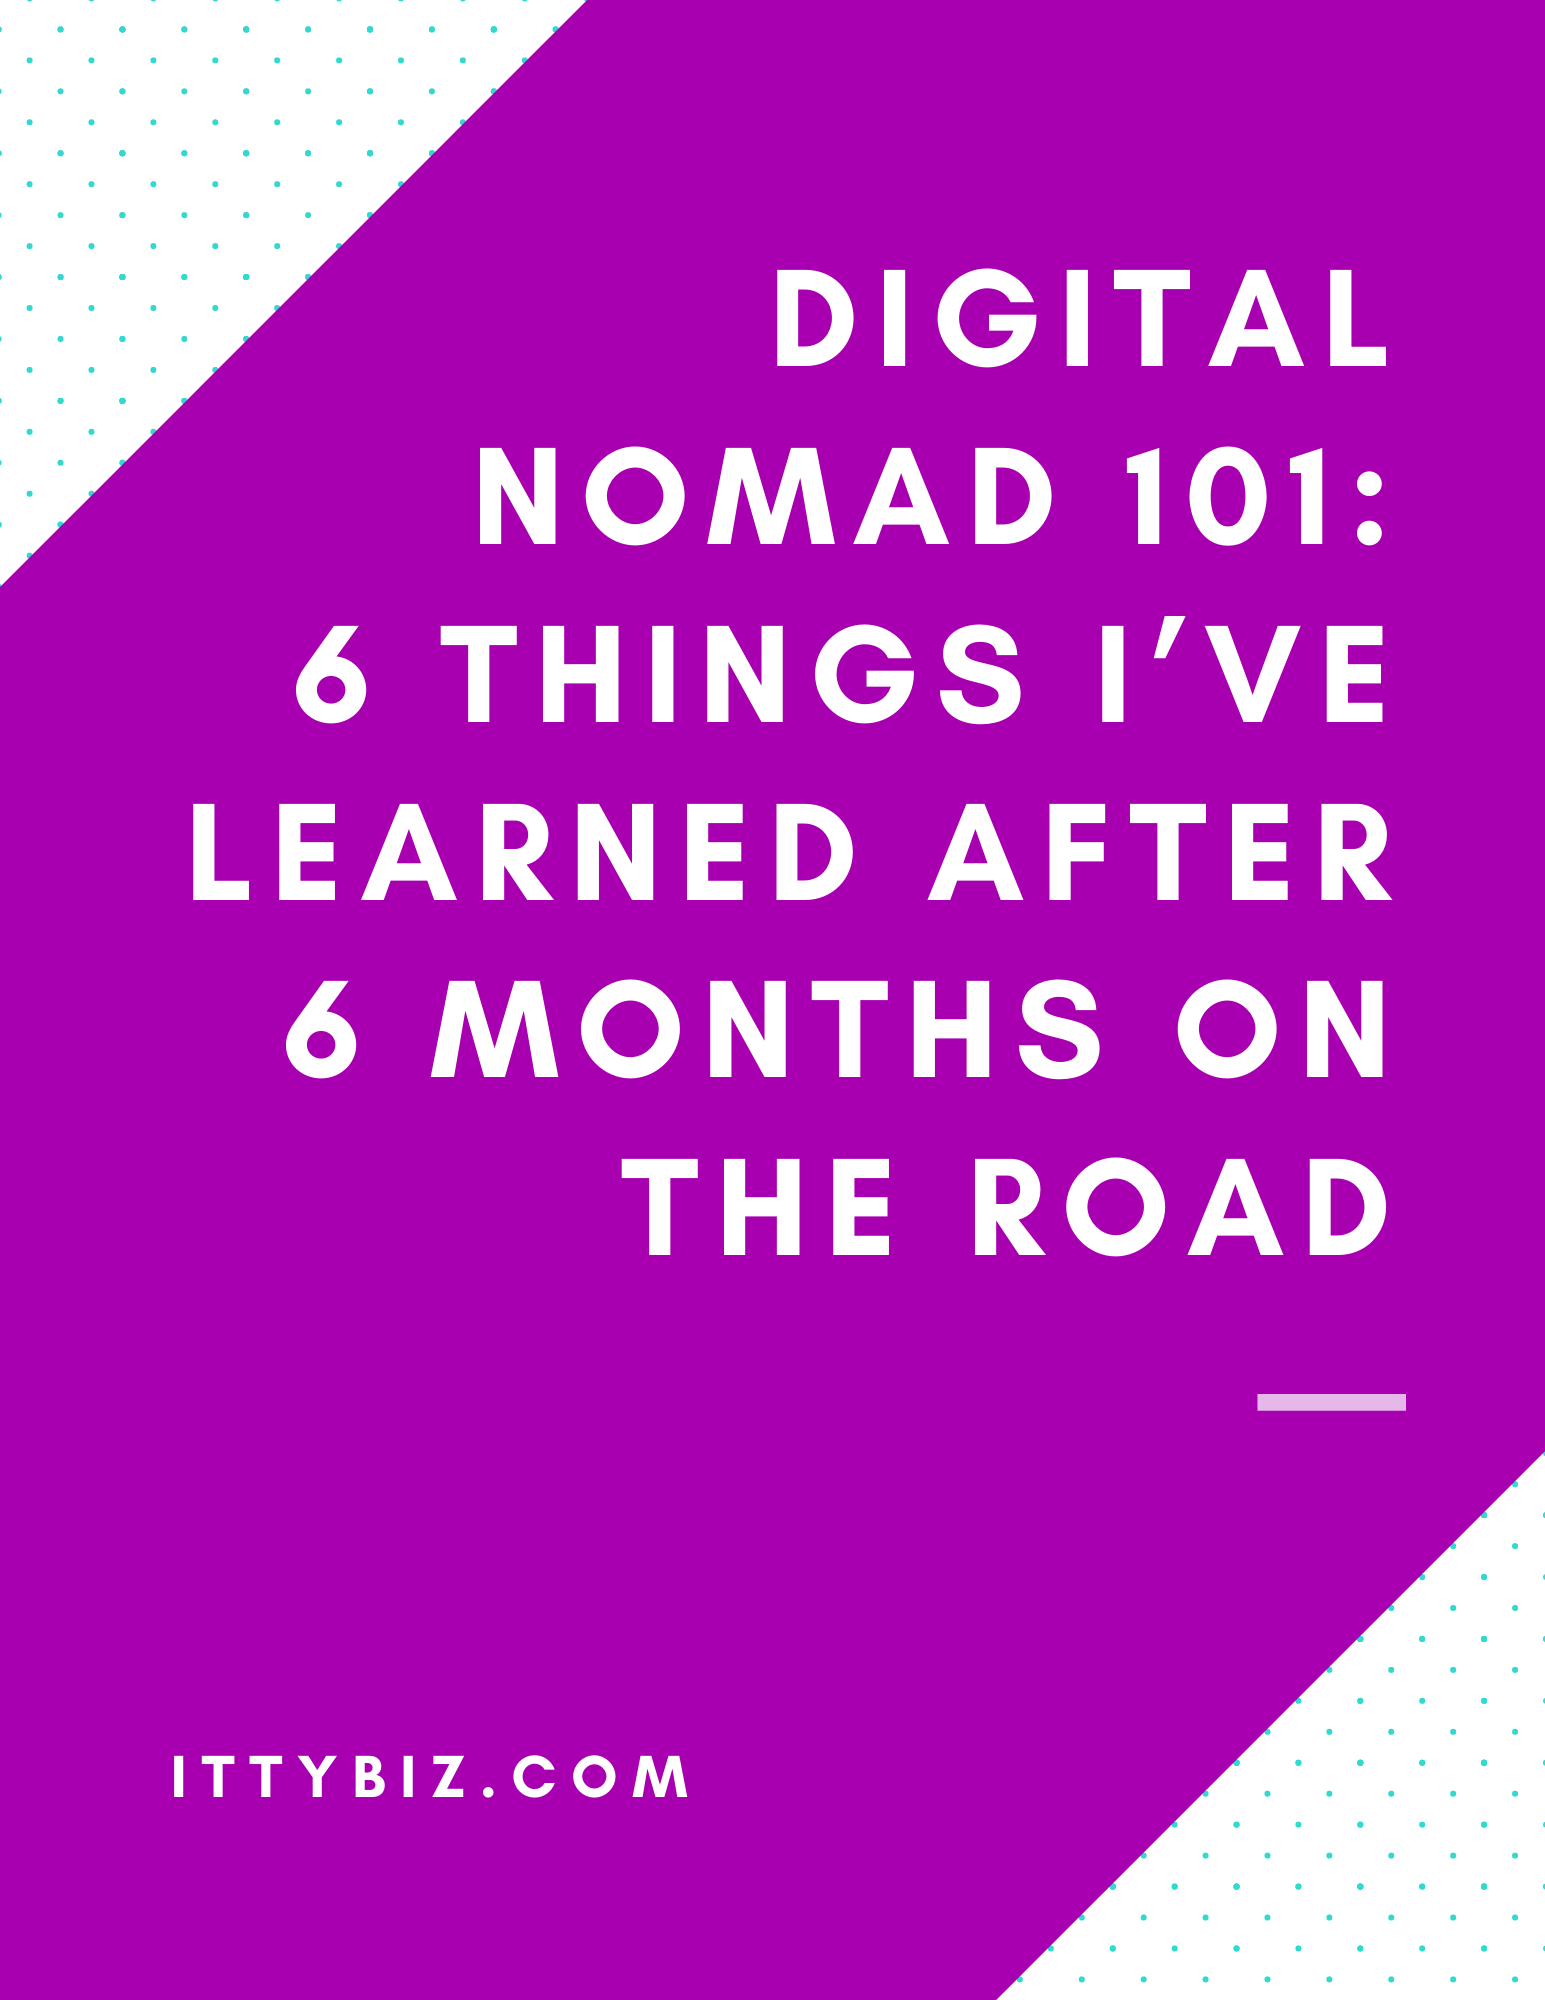 Digital Nomad 101: 6 Things I’ve Learned After 6 Months On The Road